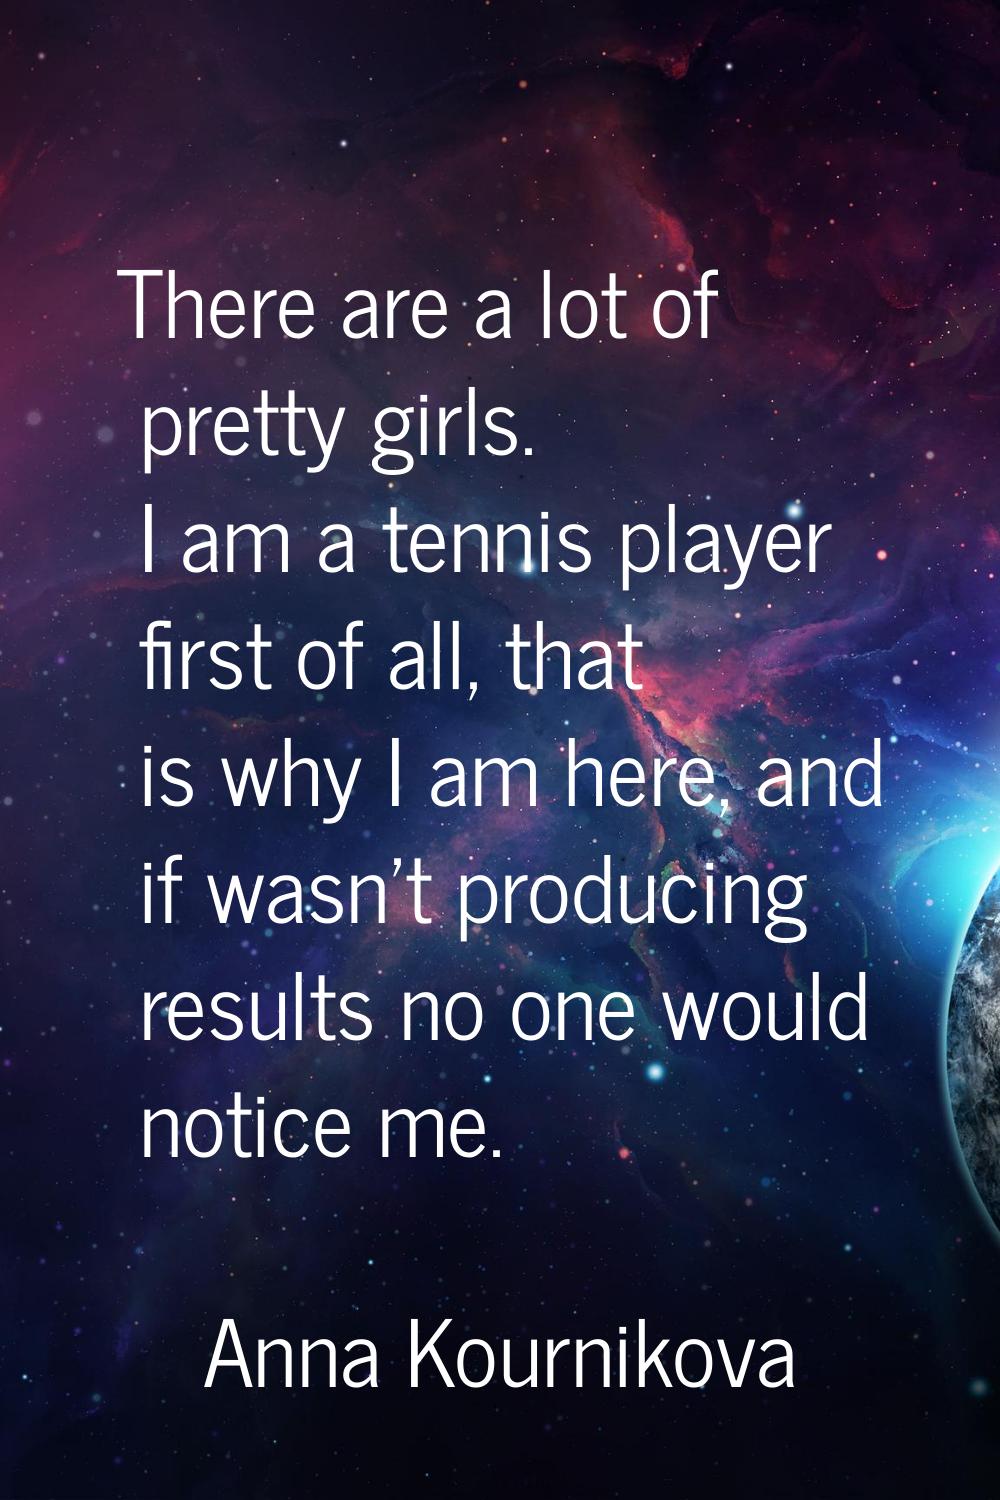 There are a lot of pretty girls. I am a tennis player first of all, that is why I am here, and if w